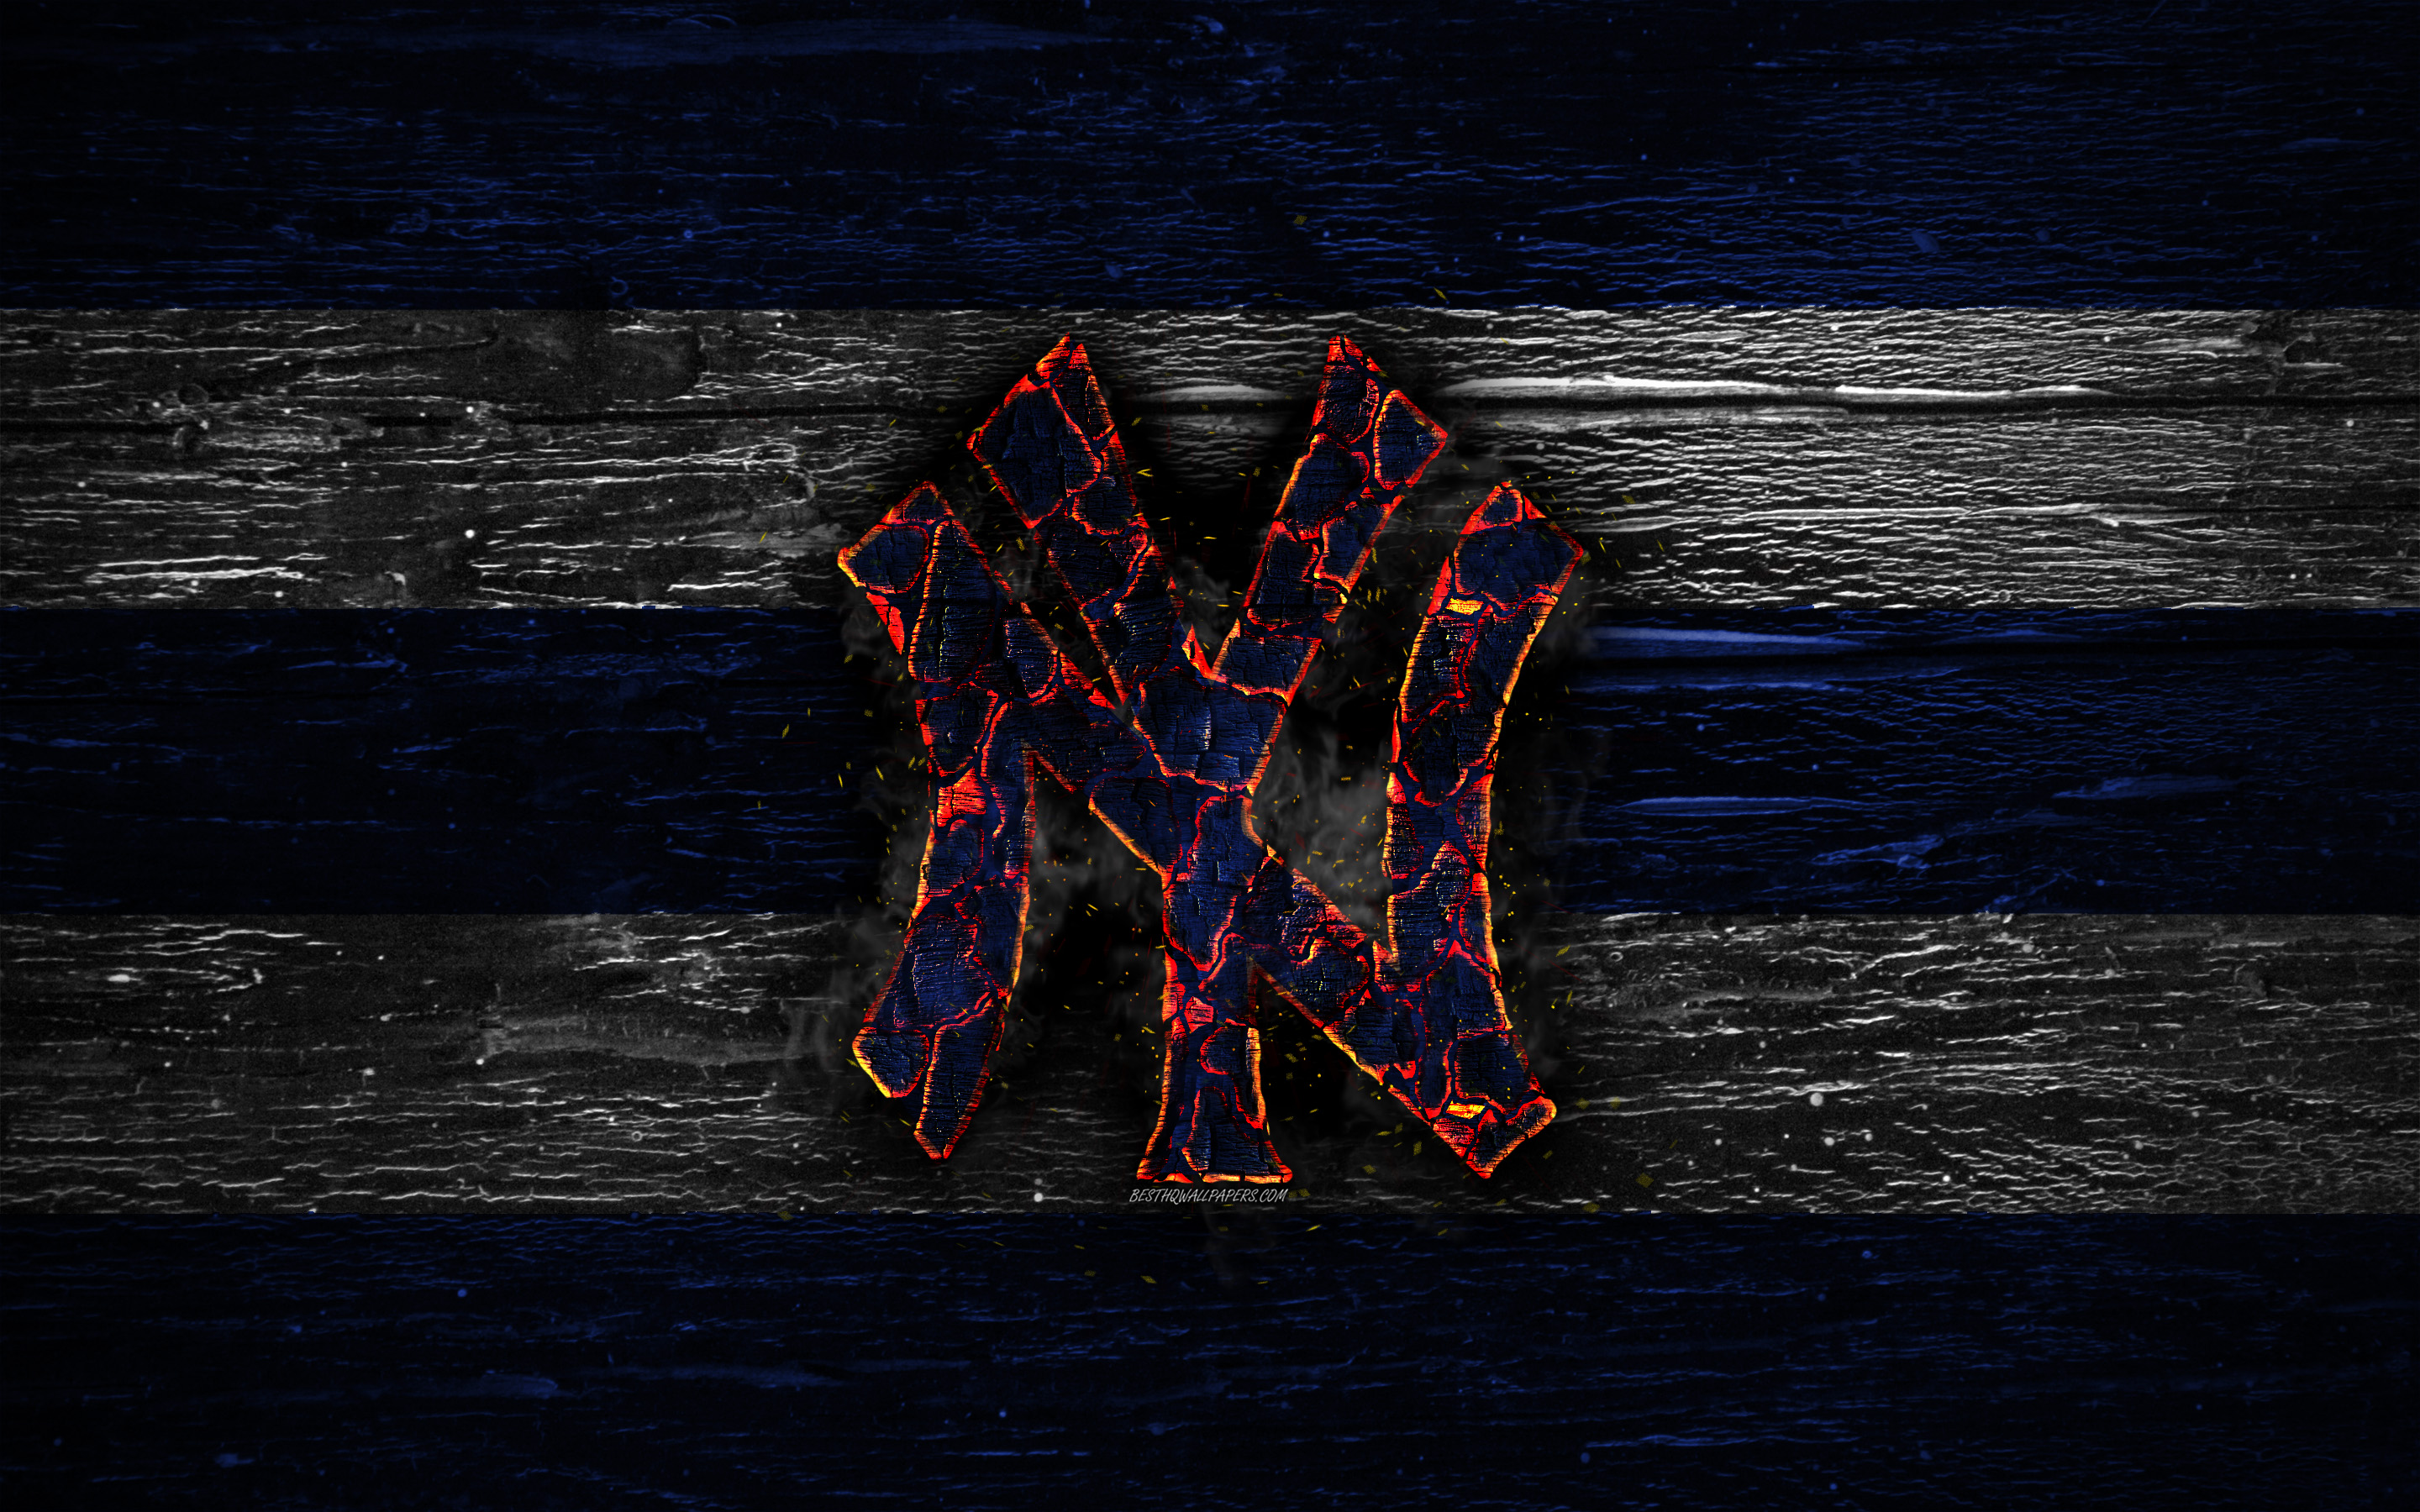 Download wallpaper New York Yankees, fire logo, MLB, blue and white lines, american baseball team, NY Yankees, grunge, baseball, New York Yankees logo, wooden texture, USA for desktop with resolution 2880x1800. High